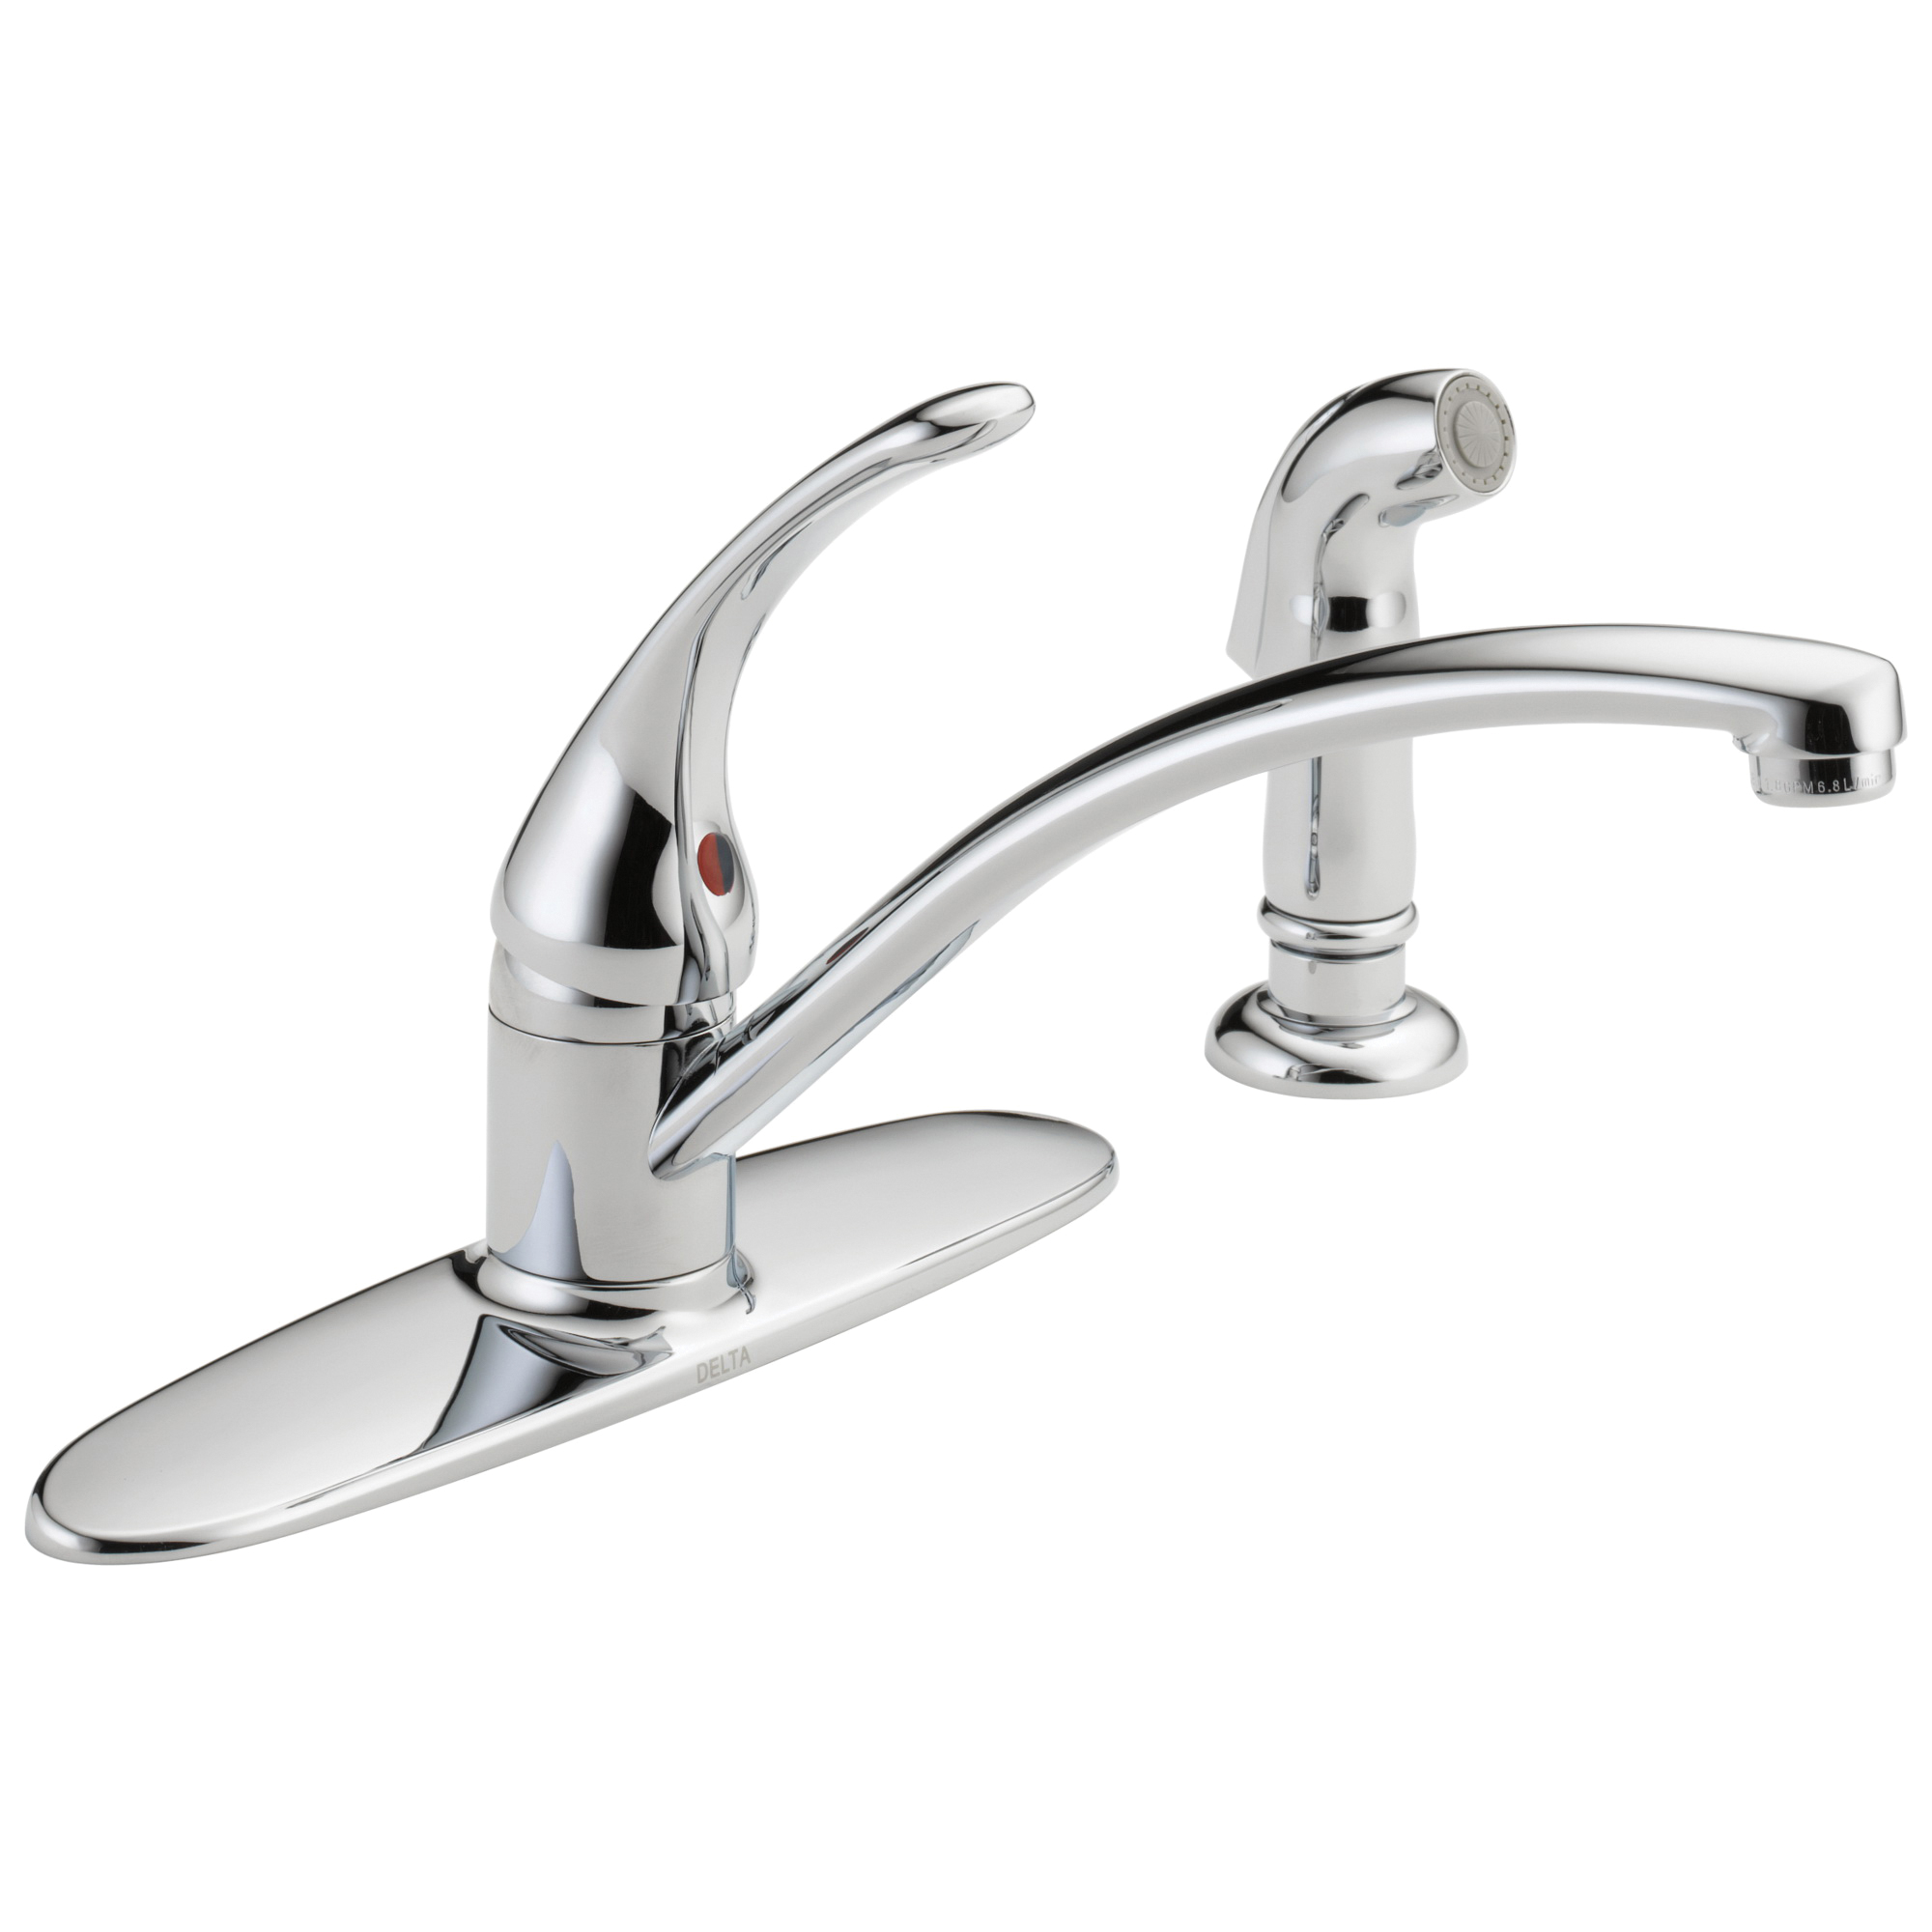 DELTA® B4410LF Foundations® Kitchen Faucet With Spray, 1.8 gpm Flow Rate, 8 in Center, Standard Spout, Polished Chrome, 1 Handles, Import